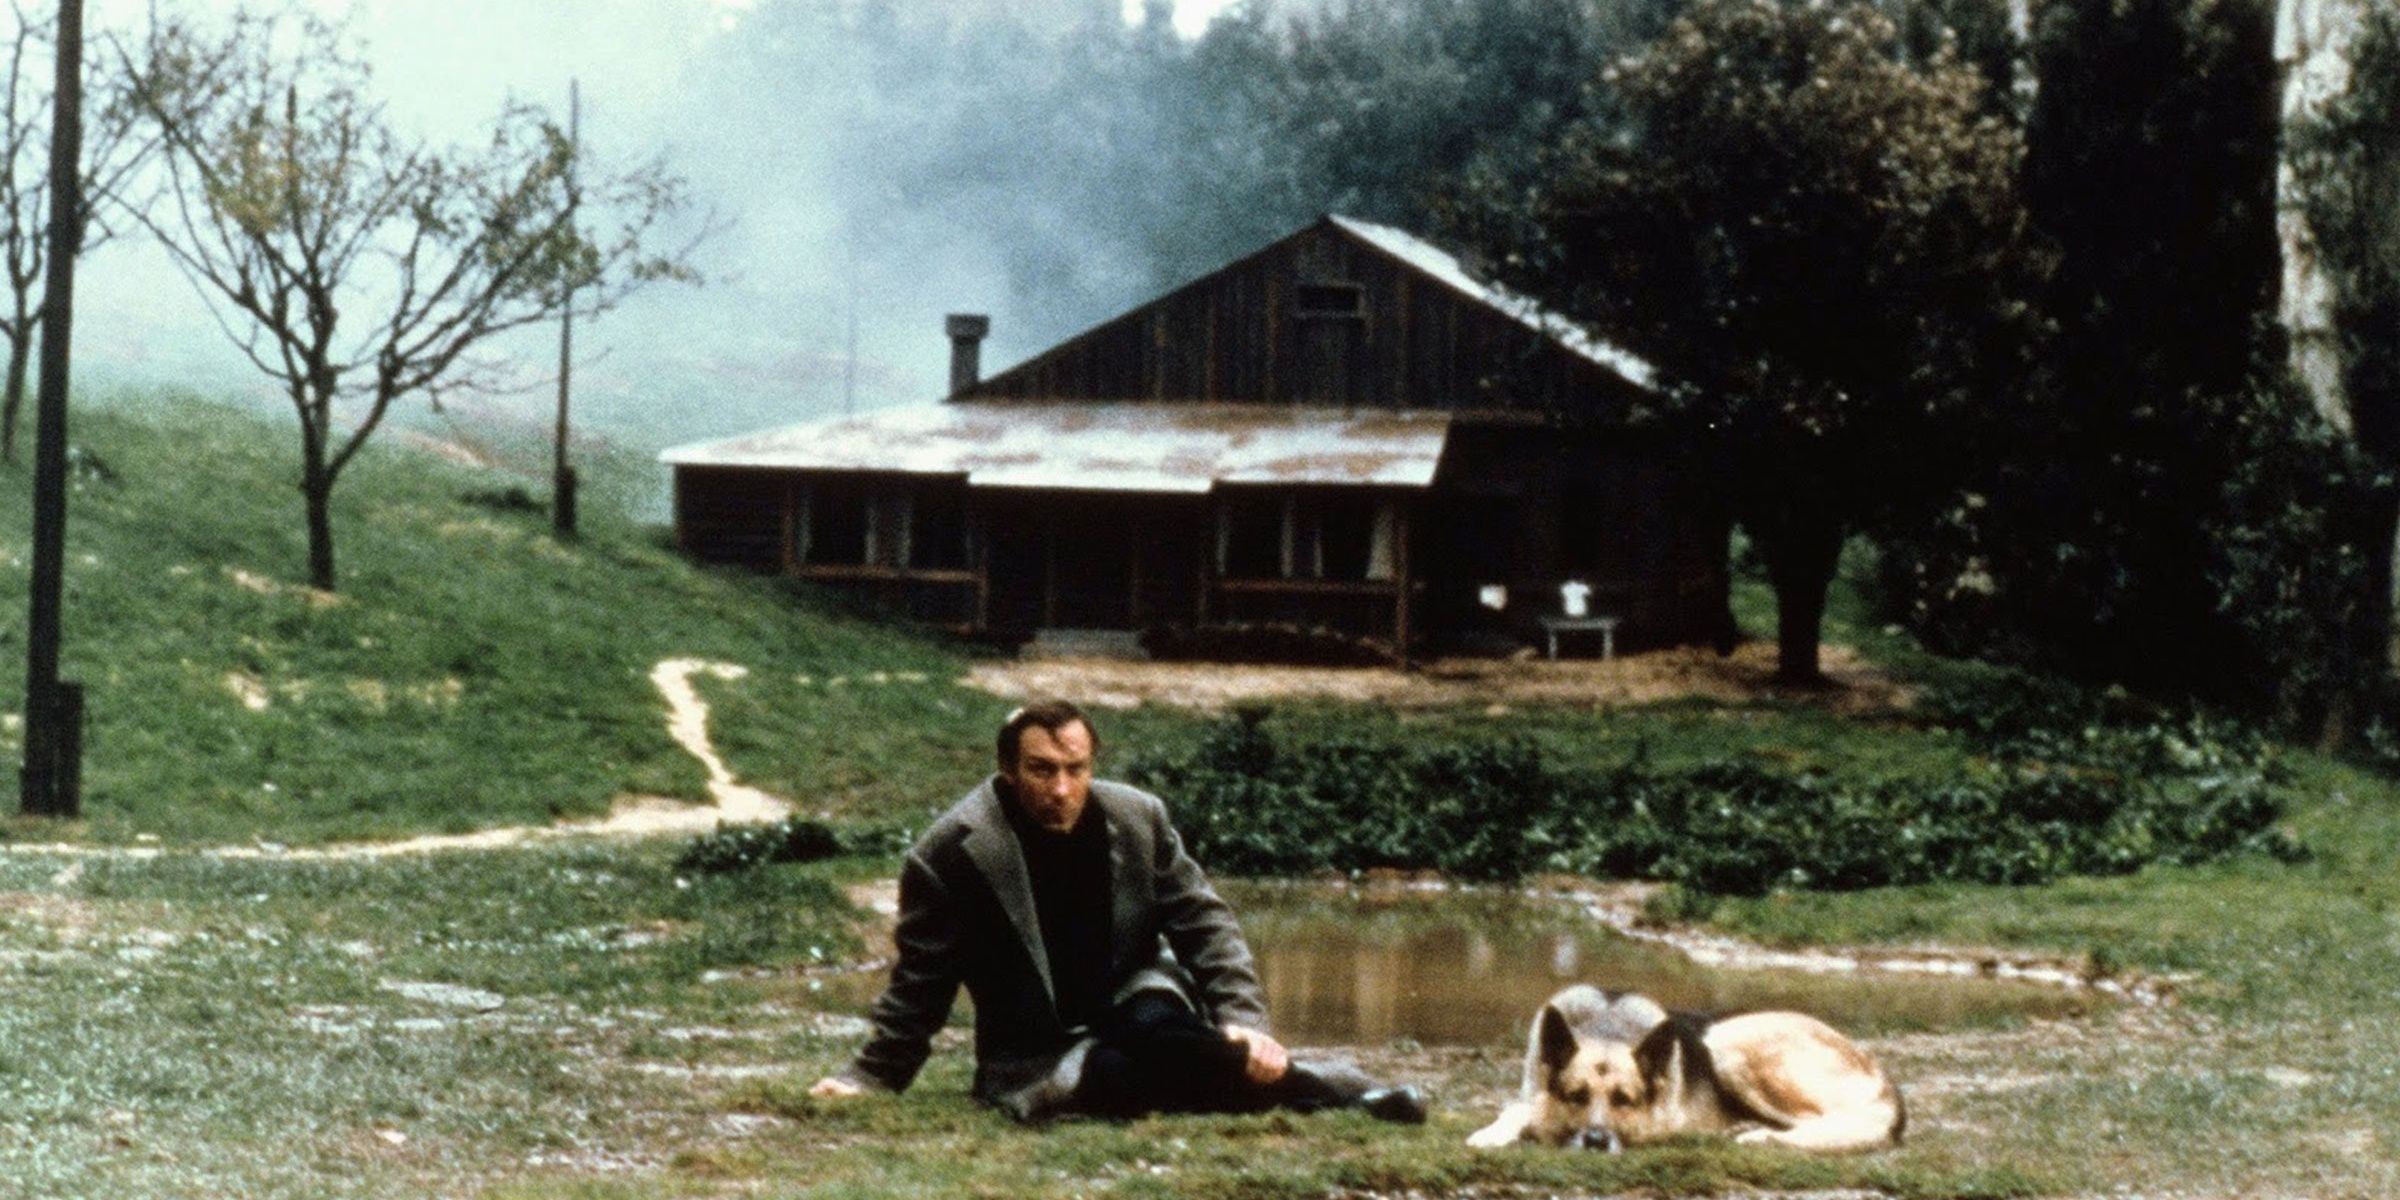 A man sitting on the ground along with a German shepherd in a still from Nostalghia